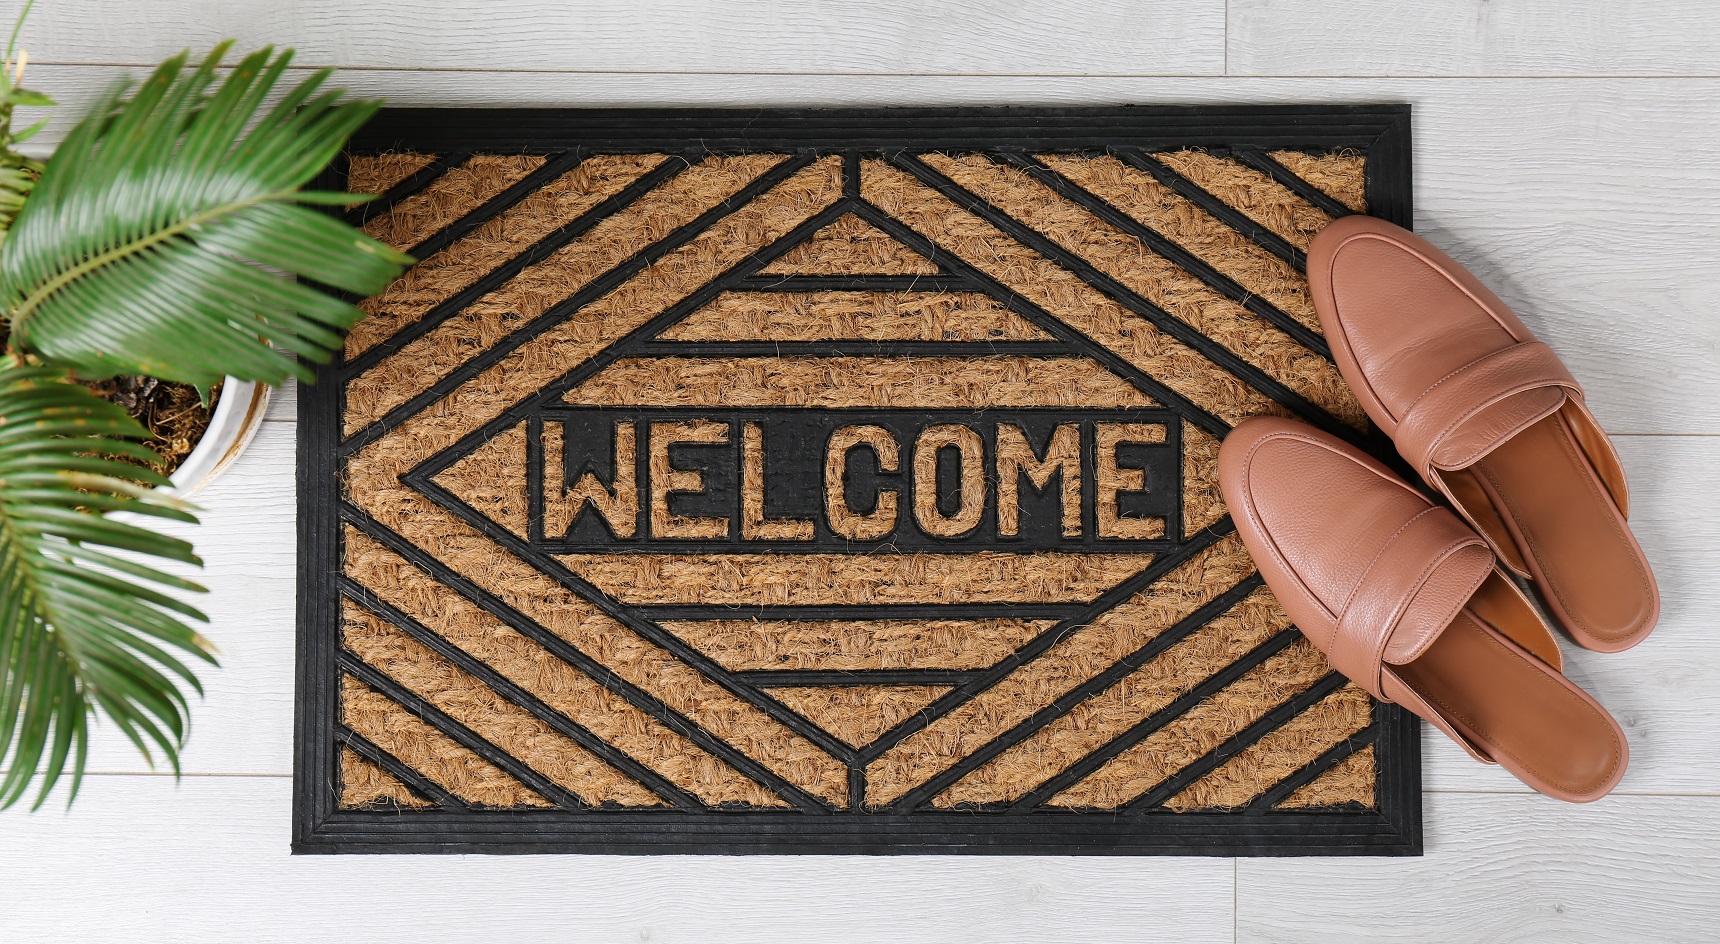 Remove highly flammable household objects like door mats. Image: Getty